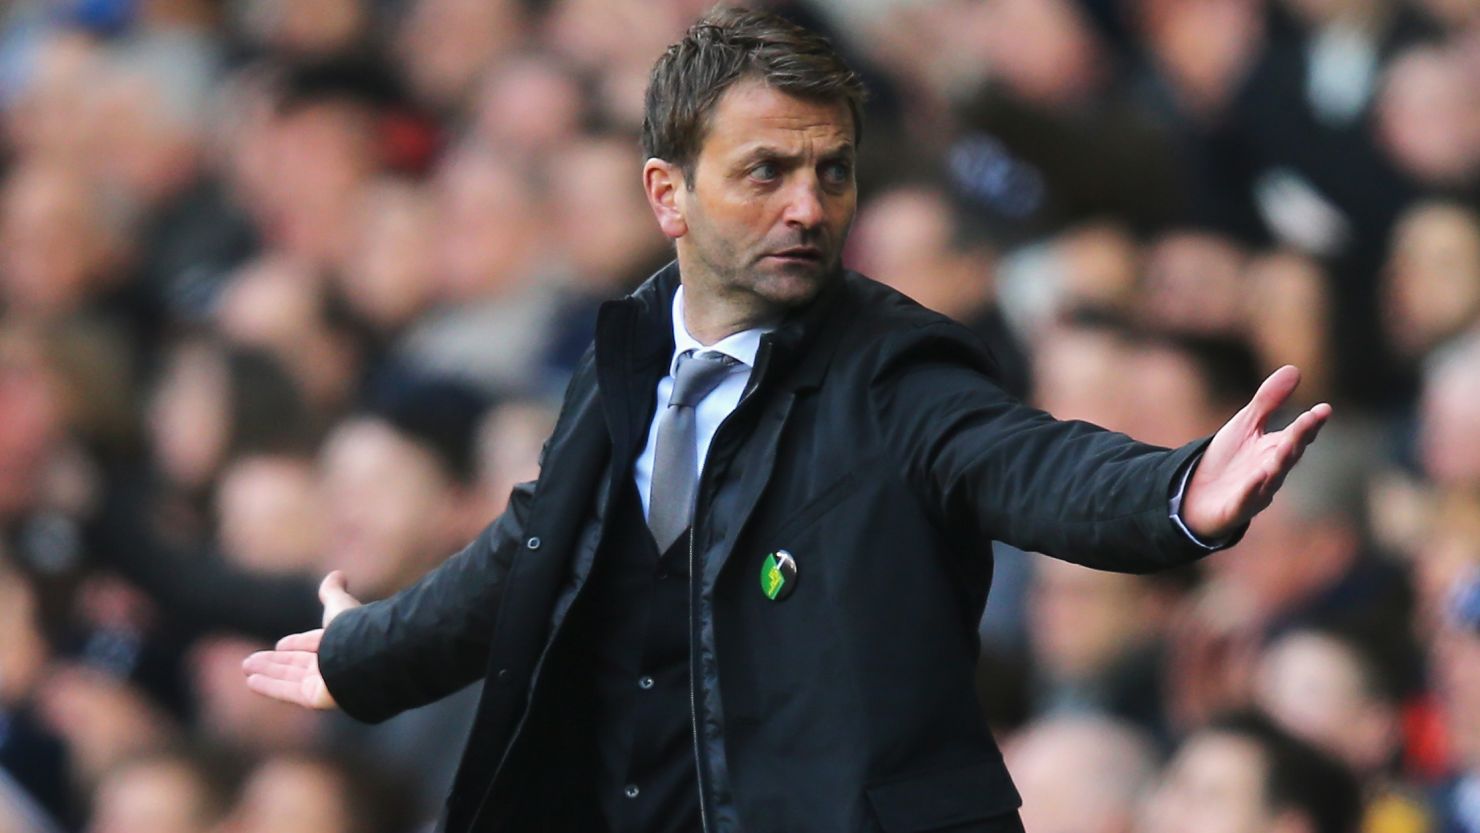 Tim Sherwood had fulfilled just five of the 18 months in his deal before being dismissed by Tottenham owner Daniel Levy